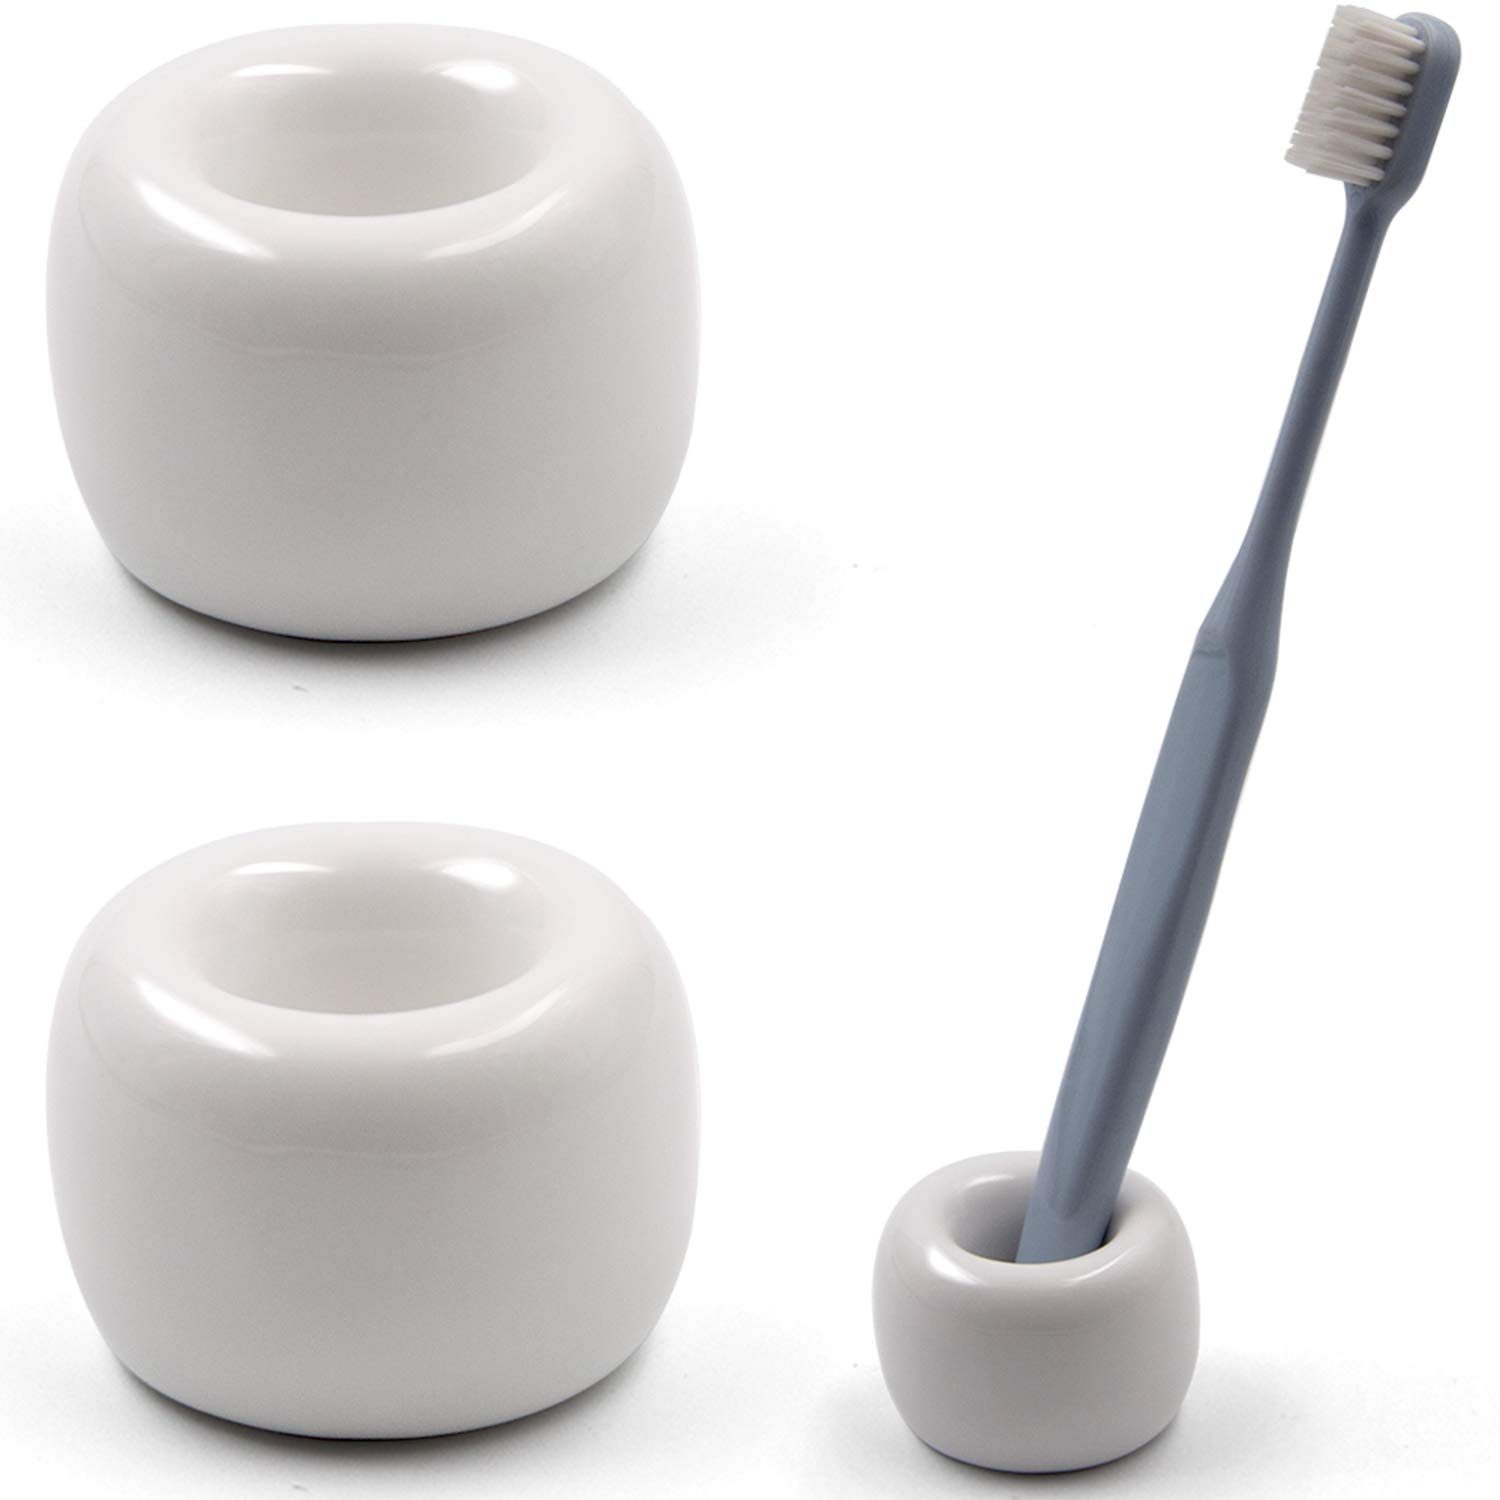 Book Cover Airmoon Mini Ceramics Handmade Couple Toothbrush Holder Stand for Bathroom Vanity Countertops, White, Pack of 2